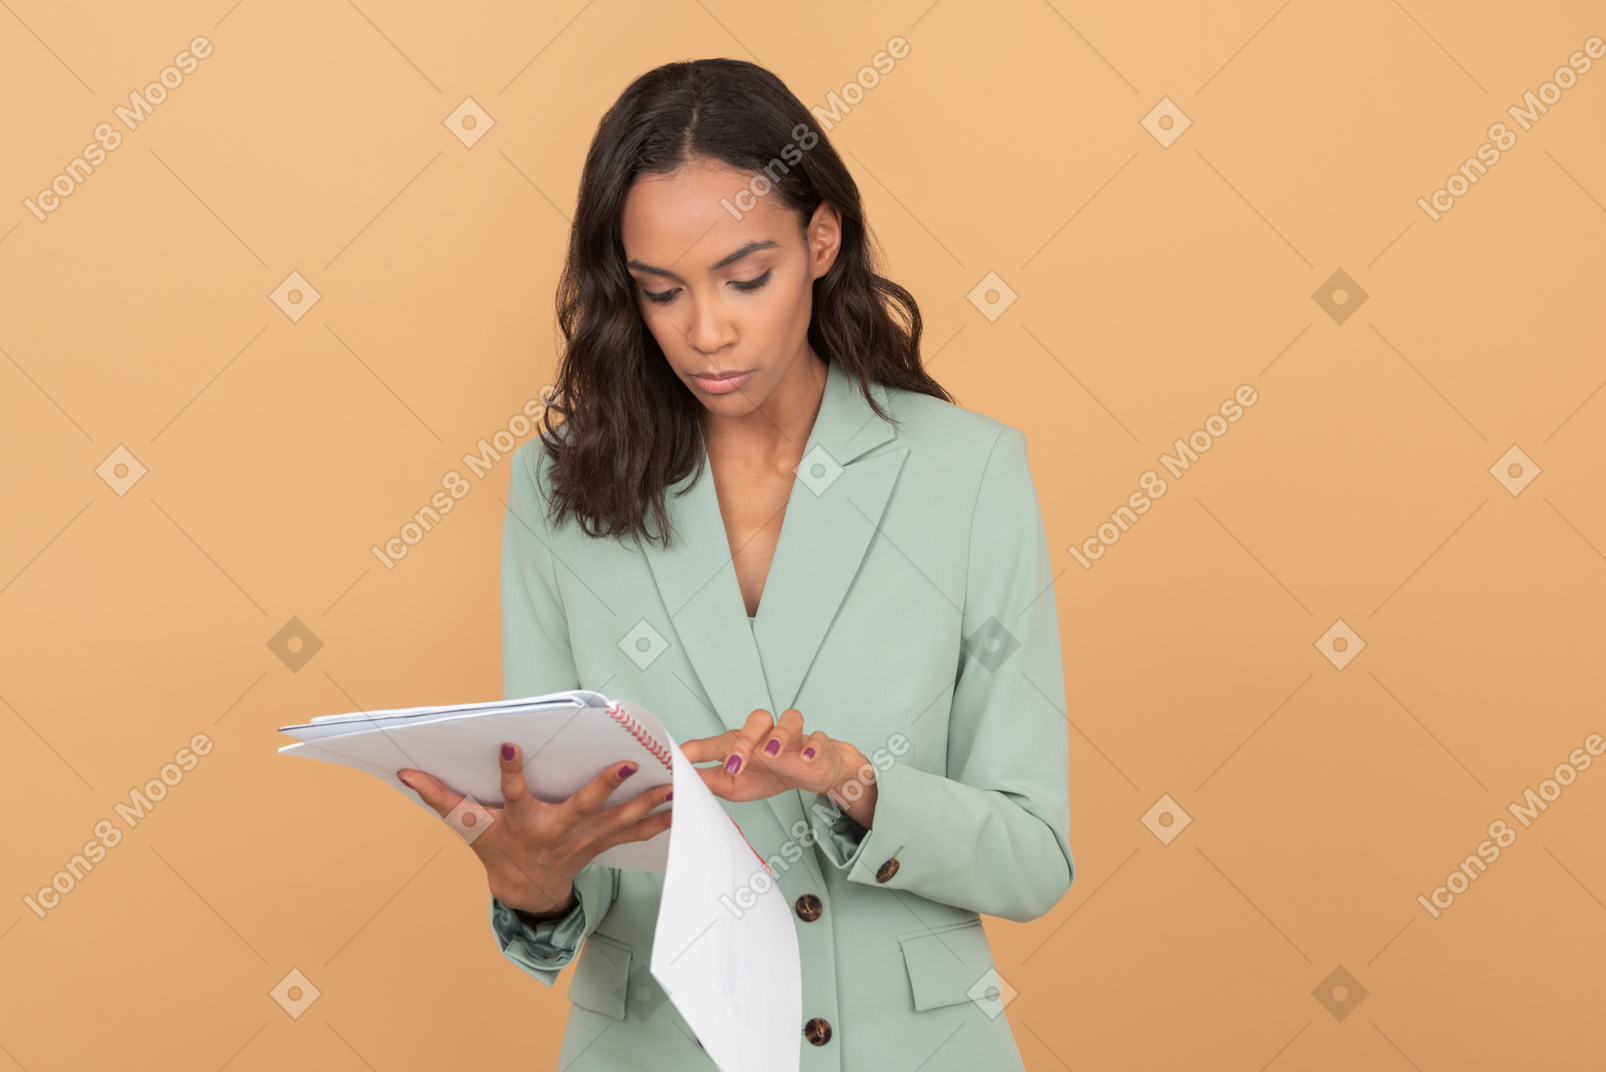 Beautiful office worker checking some information